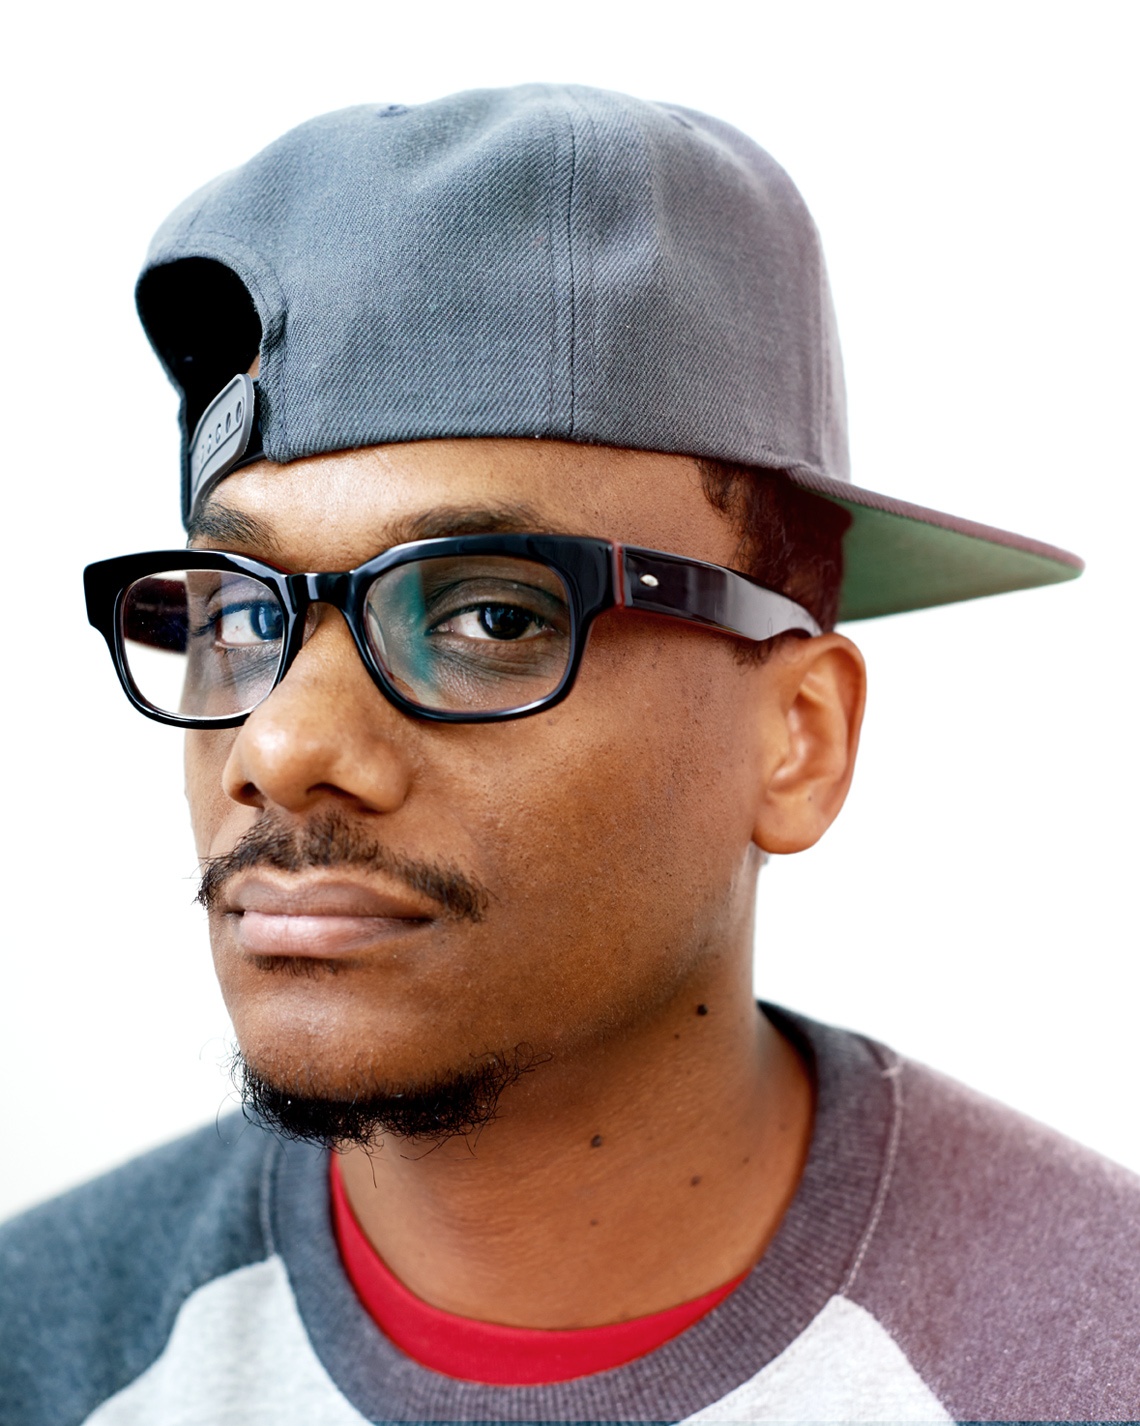 A portrait of DJ Donwill. Donwill is a Black man who wears a backward baseball cap with a straight bill, rectangular glasses, and a t-shirt with a red undershirt visible just under the neck.